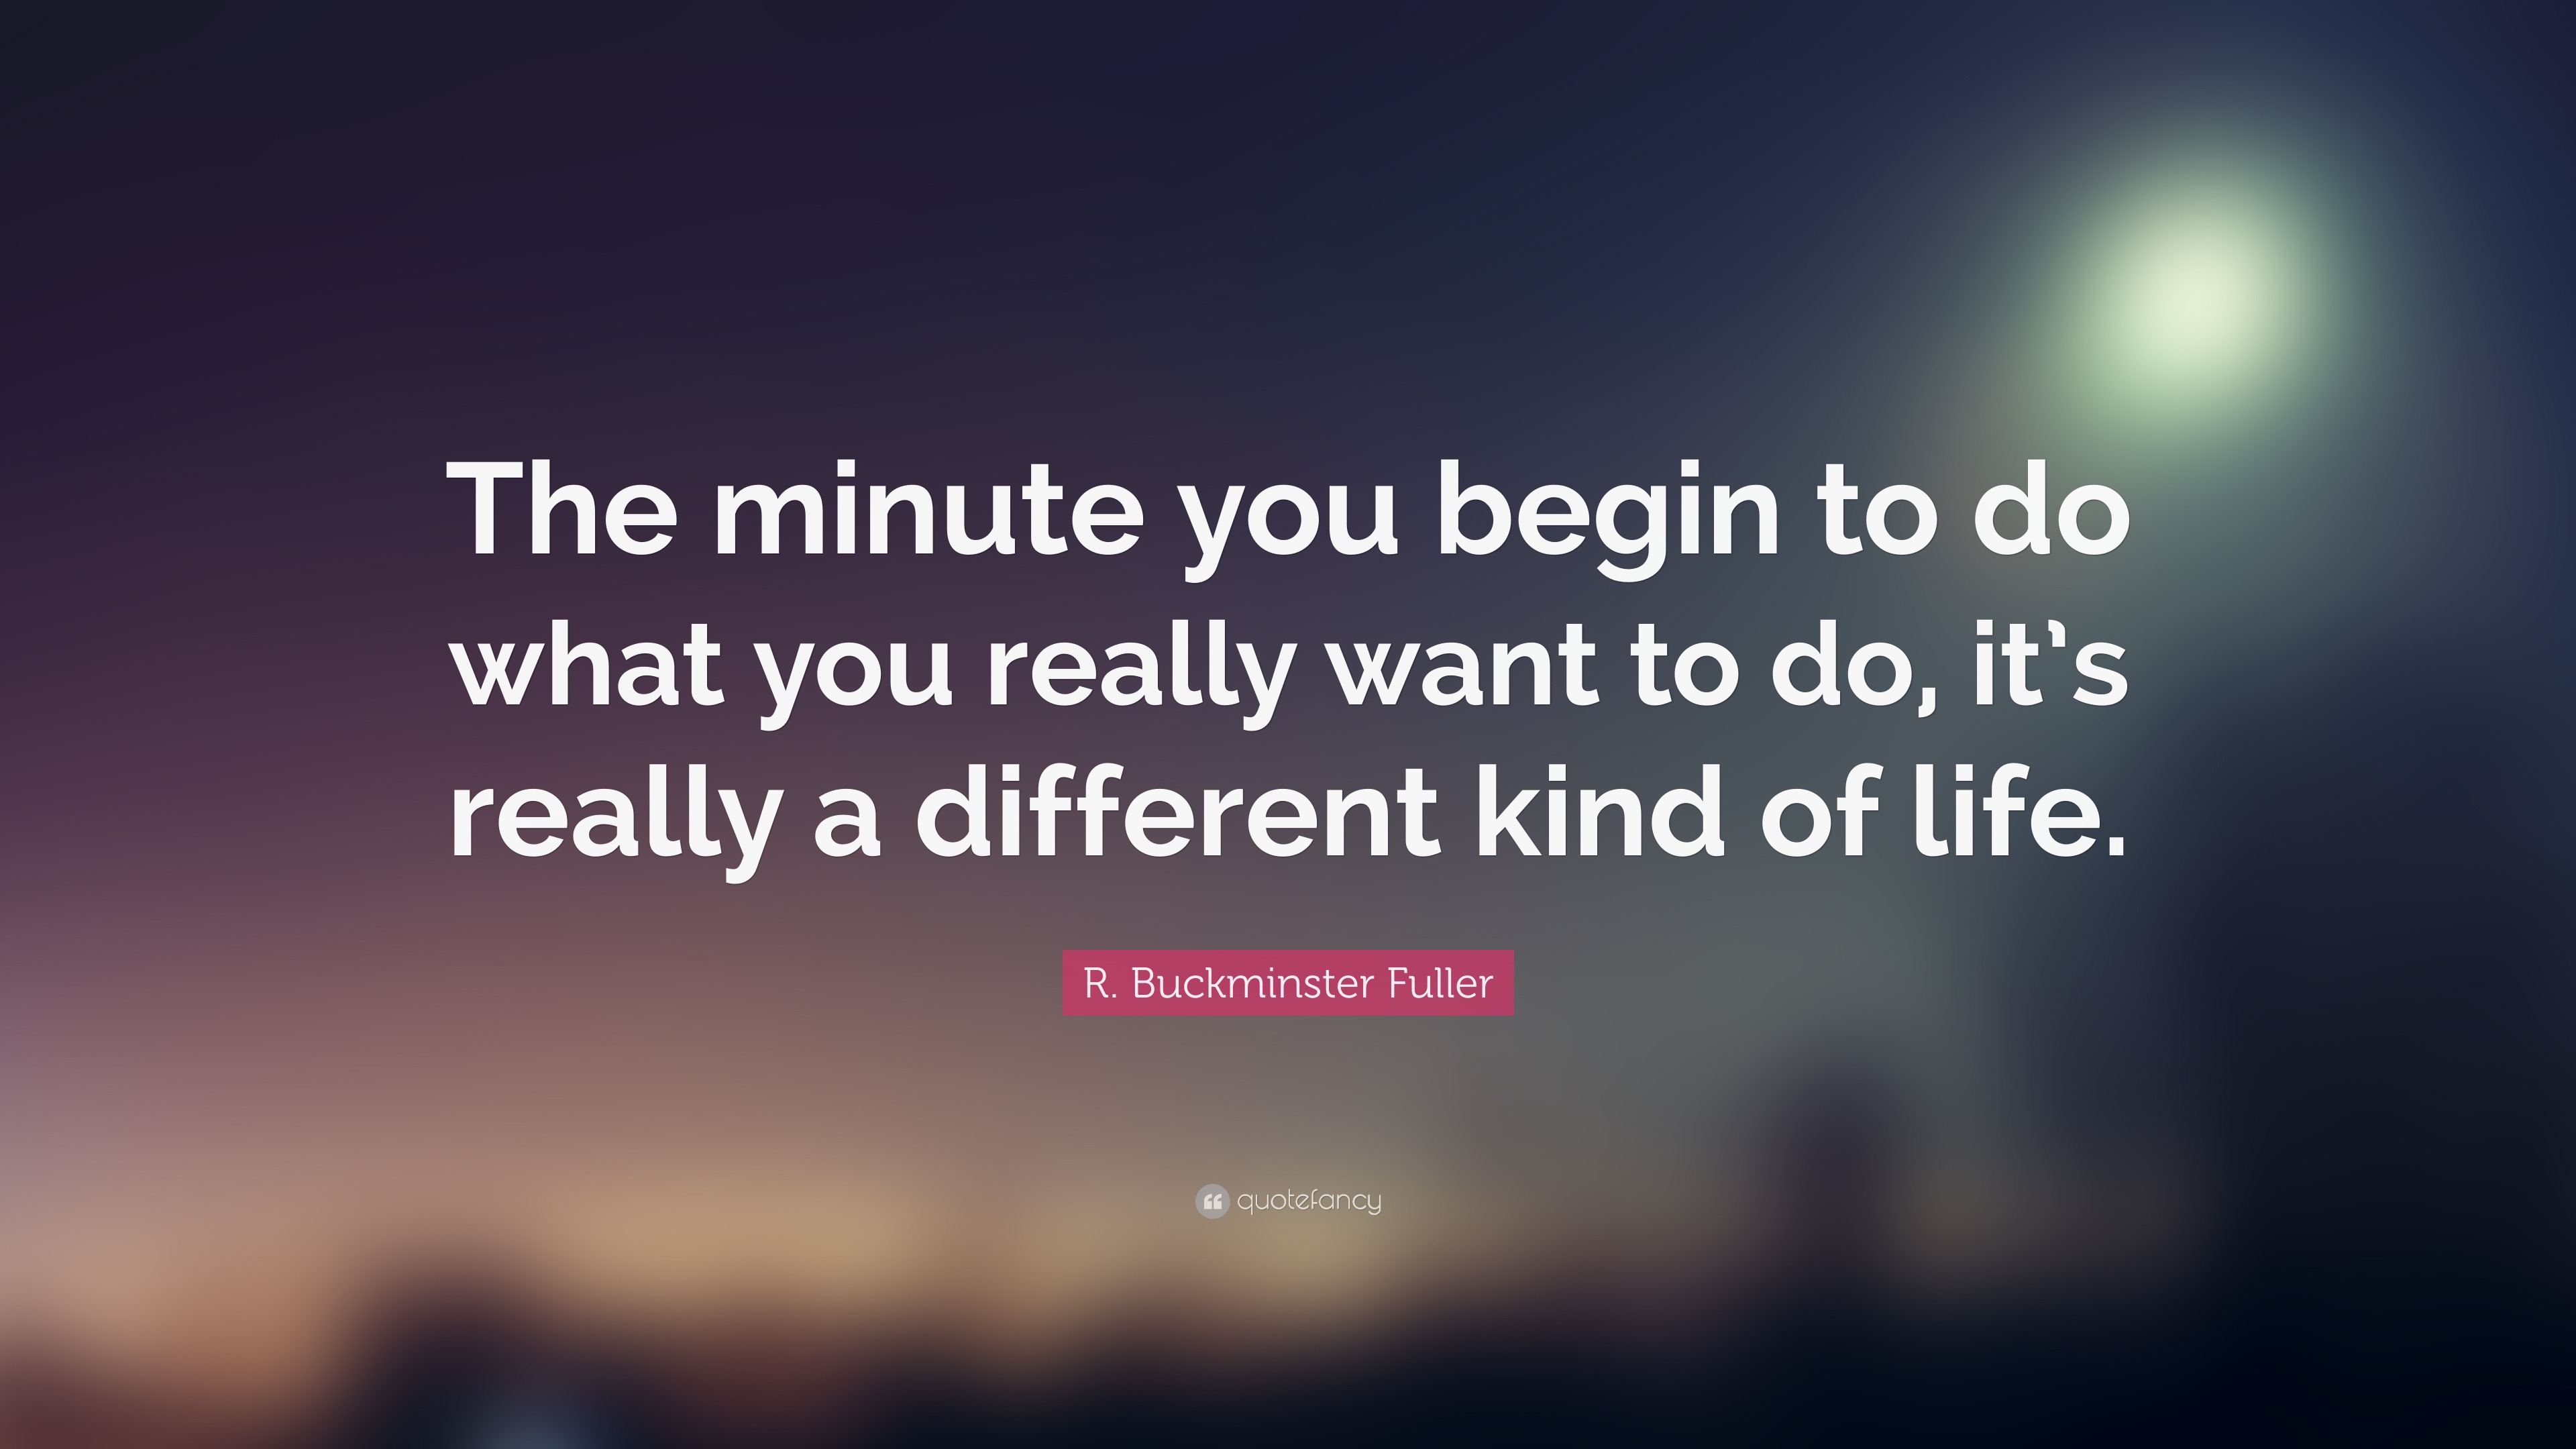 R. Buckminster Fuller Quote: “The minute you begin to do what you ...